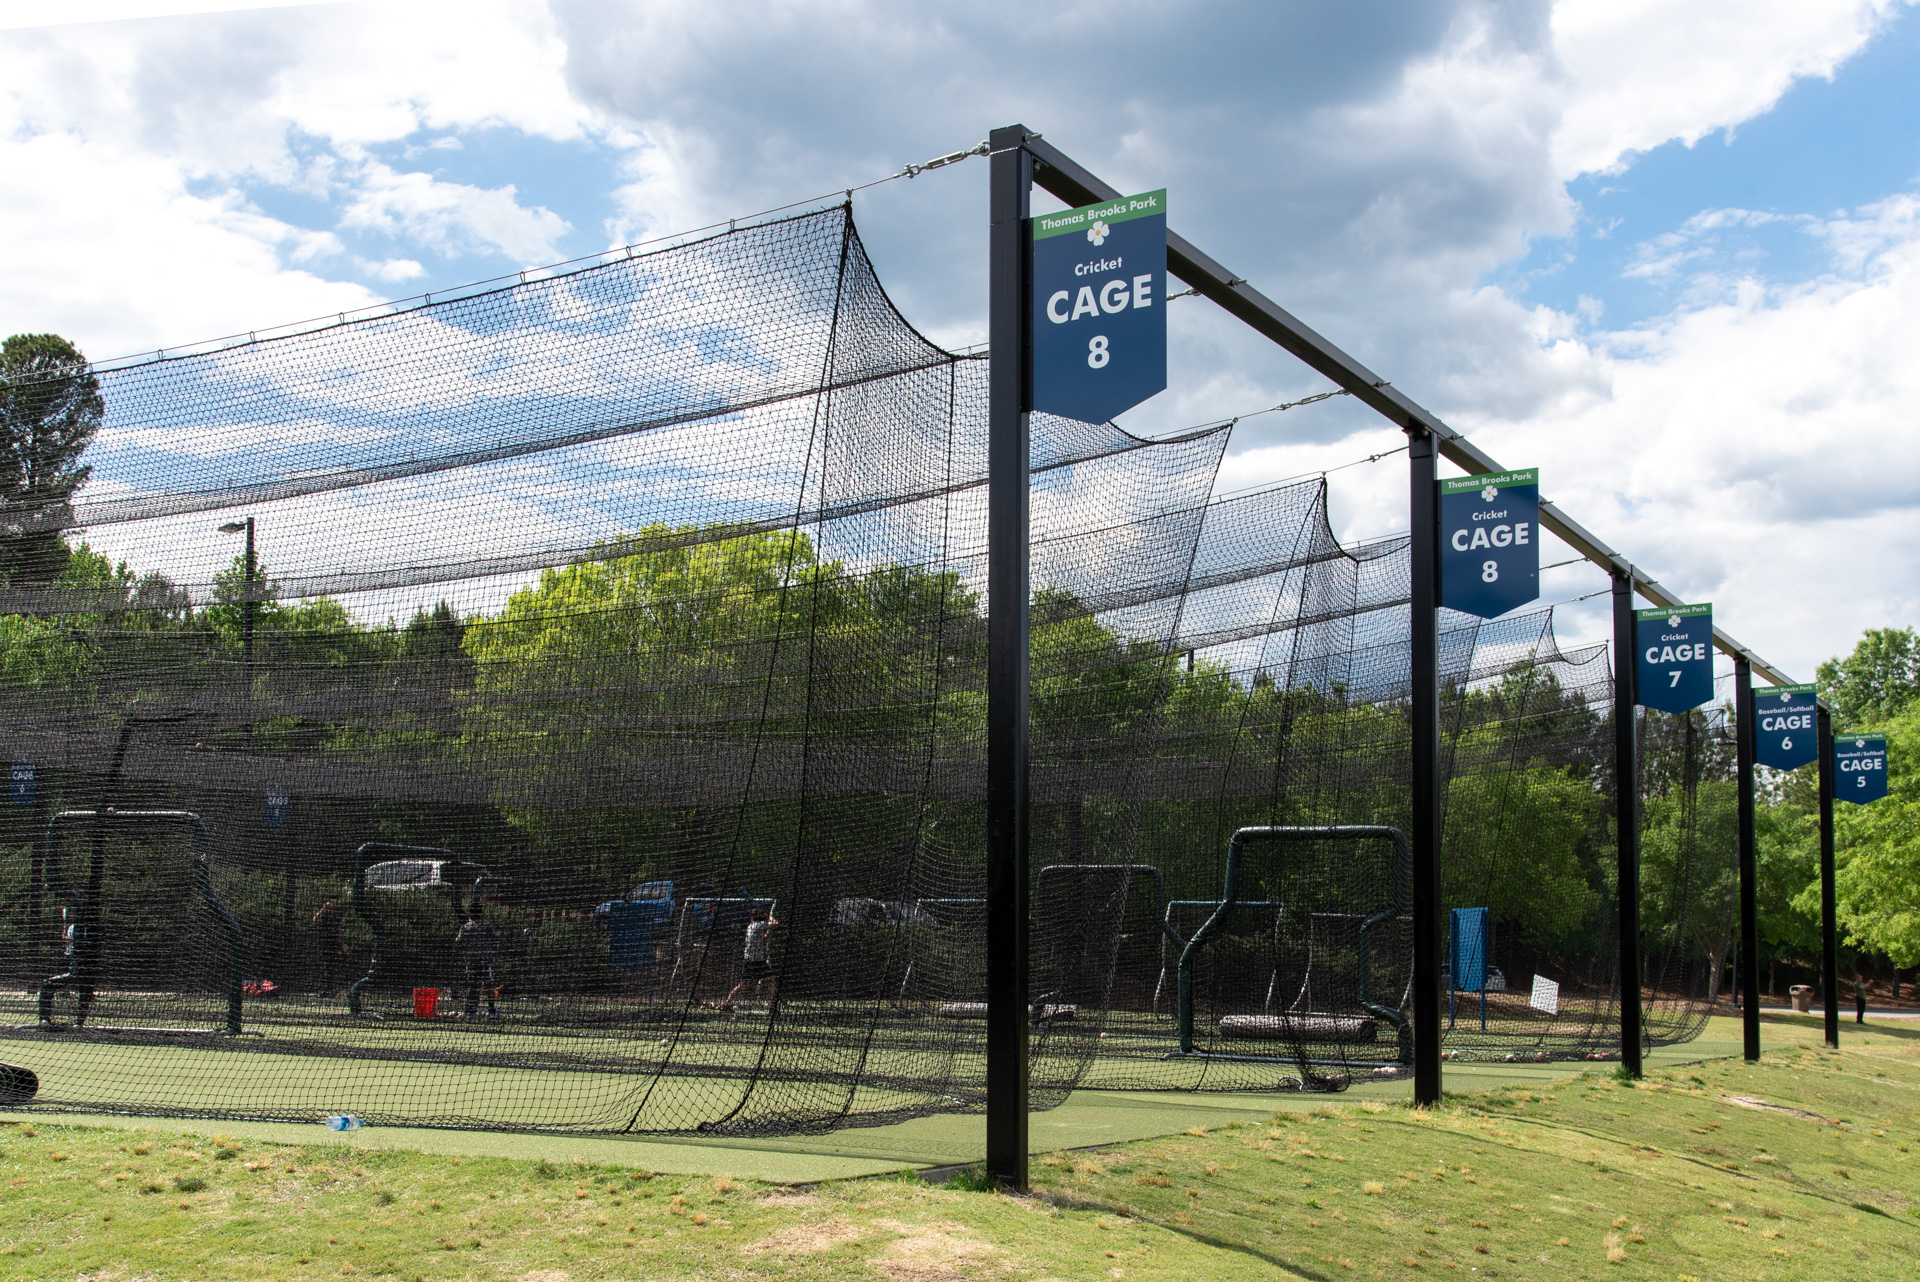 Company insurance is intended to safeguard the financial assets of a business owner and is a vital investment for a batting cage.